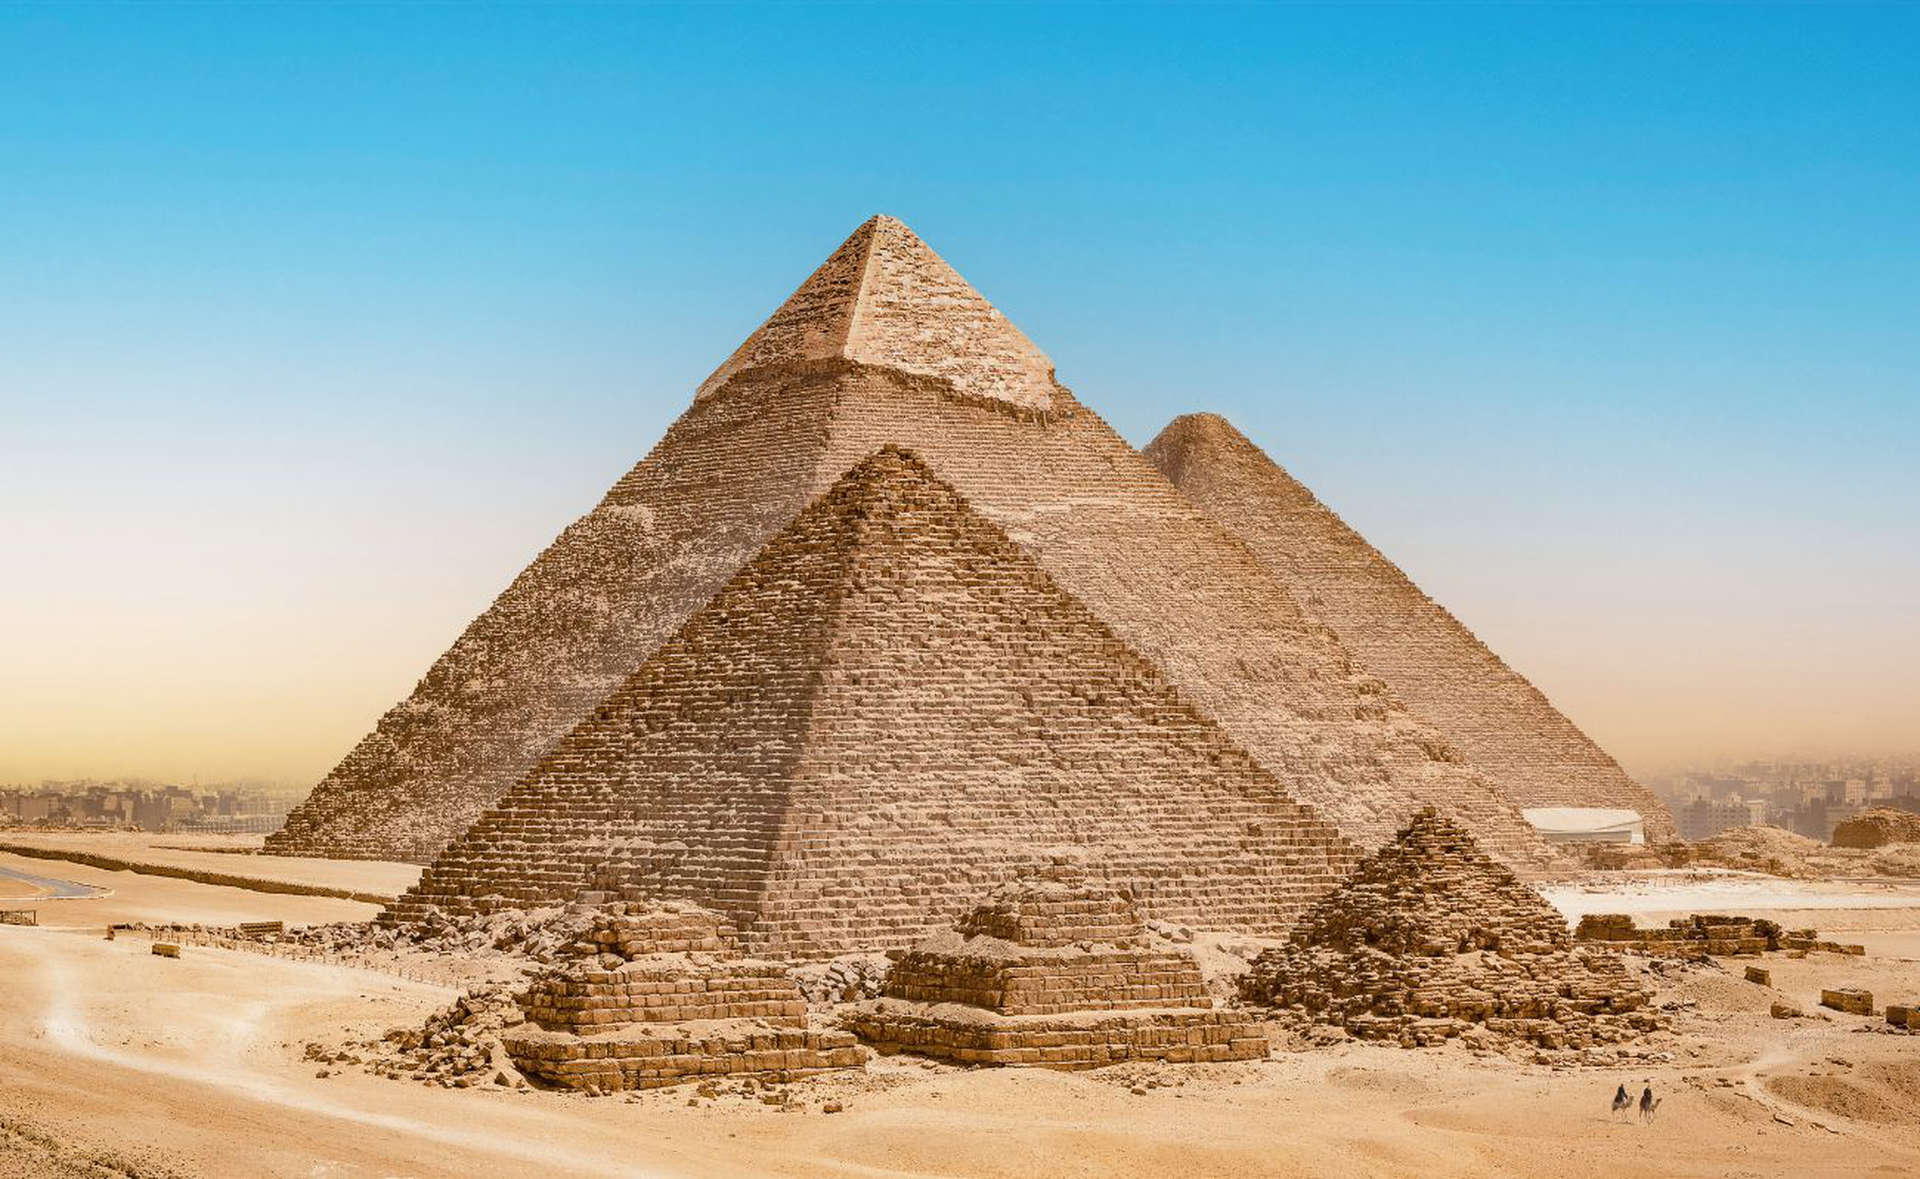 The Great Pyramids of Giza, Egypt 